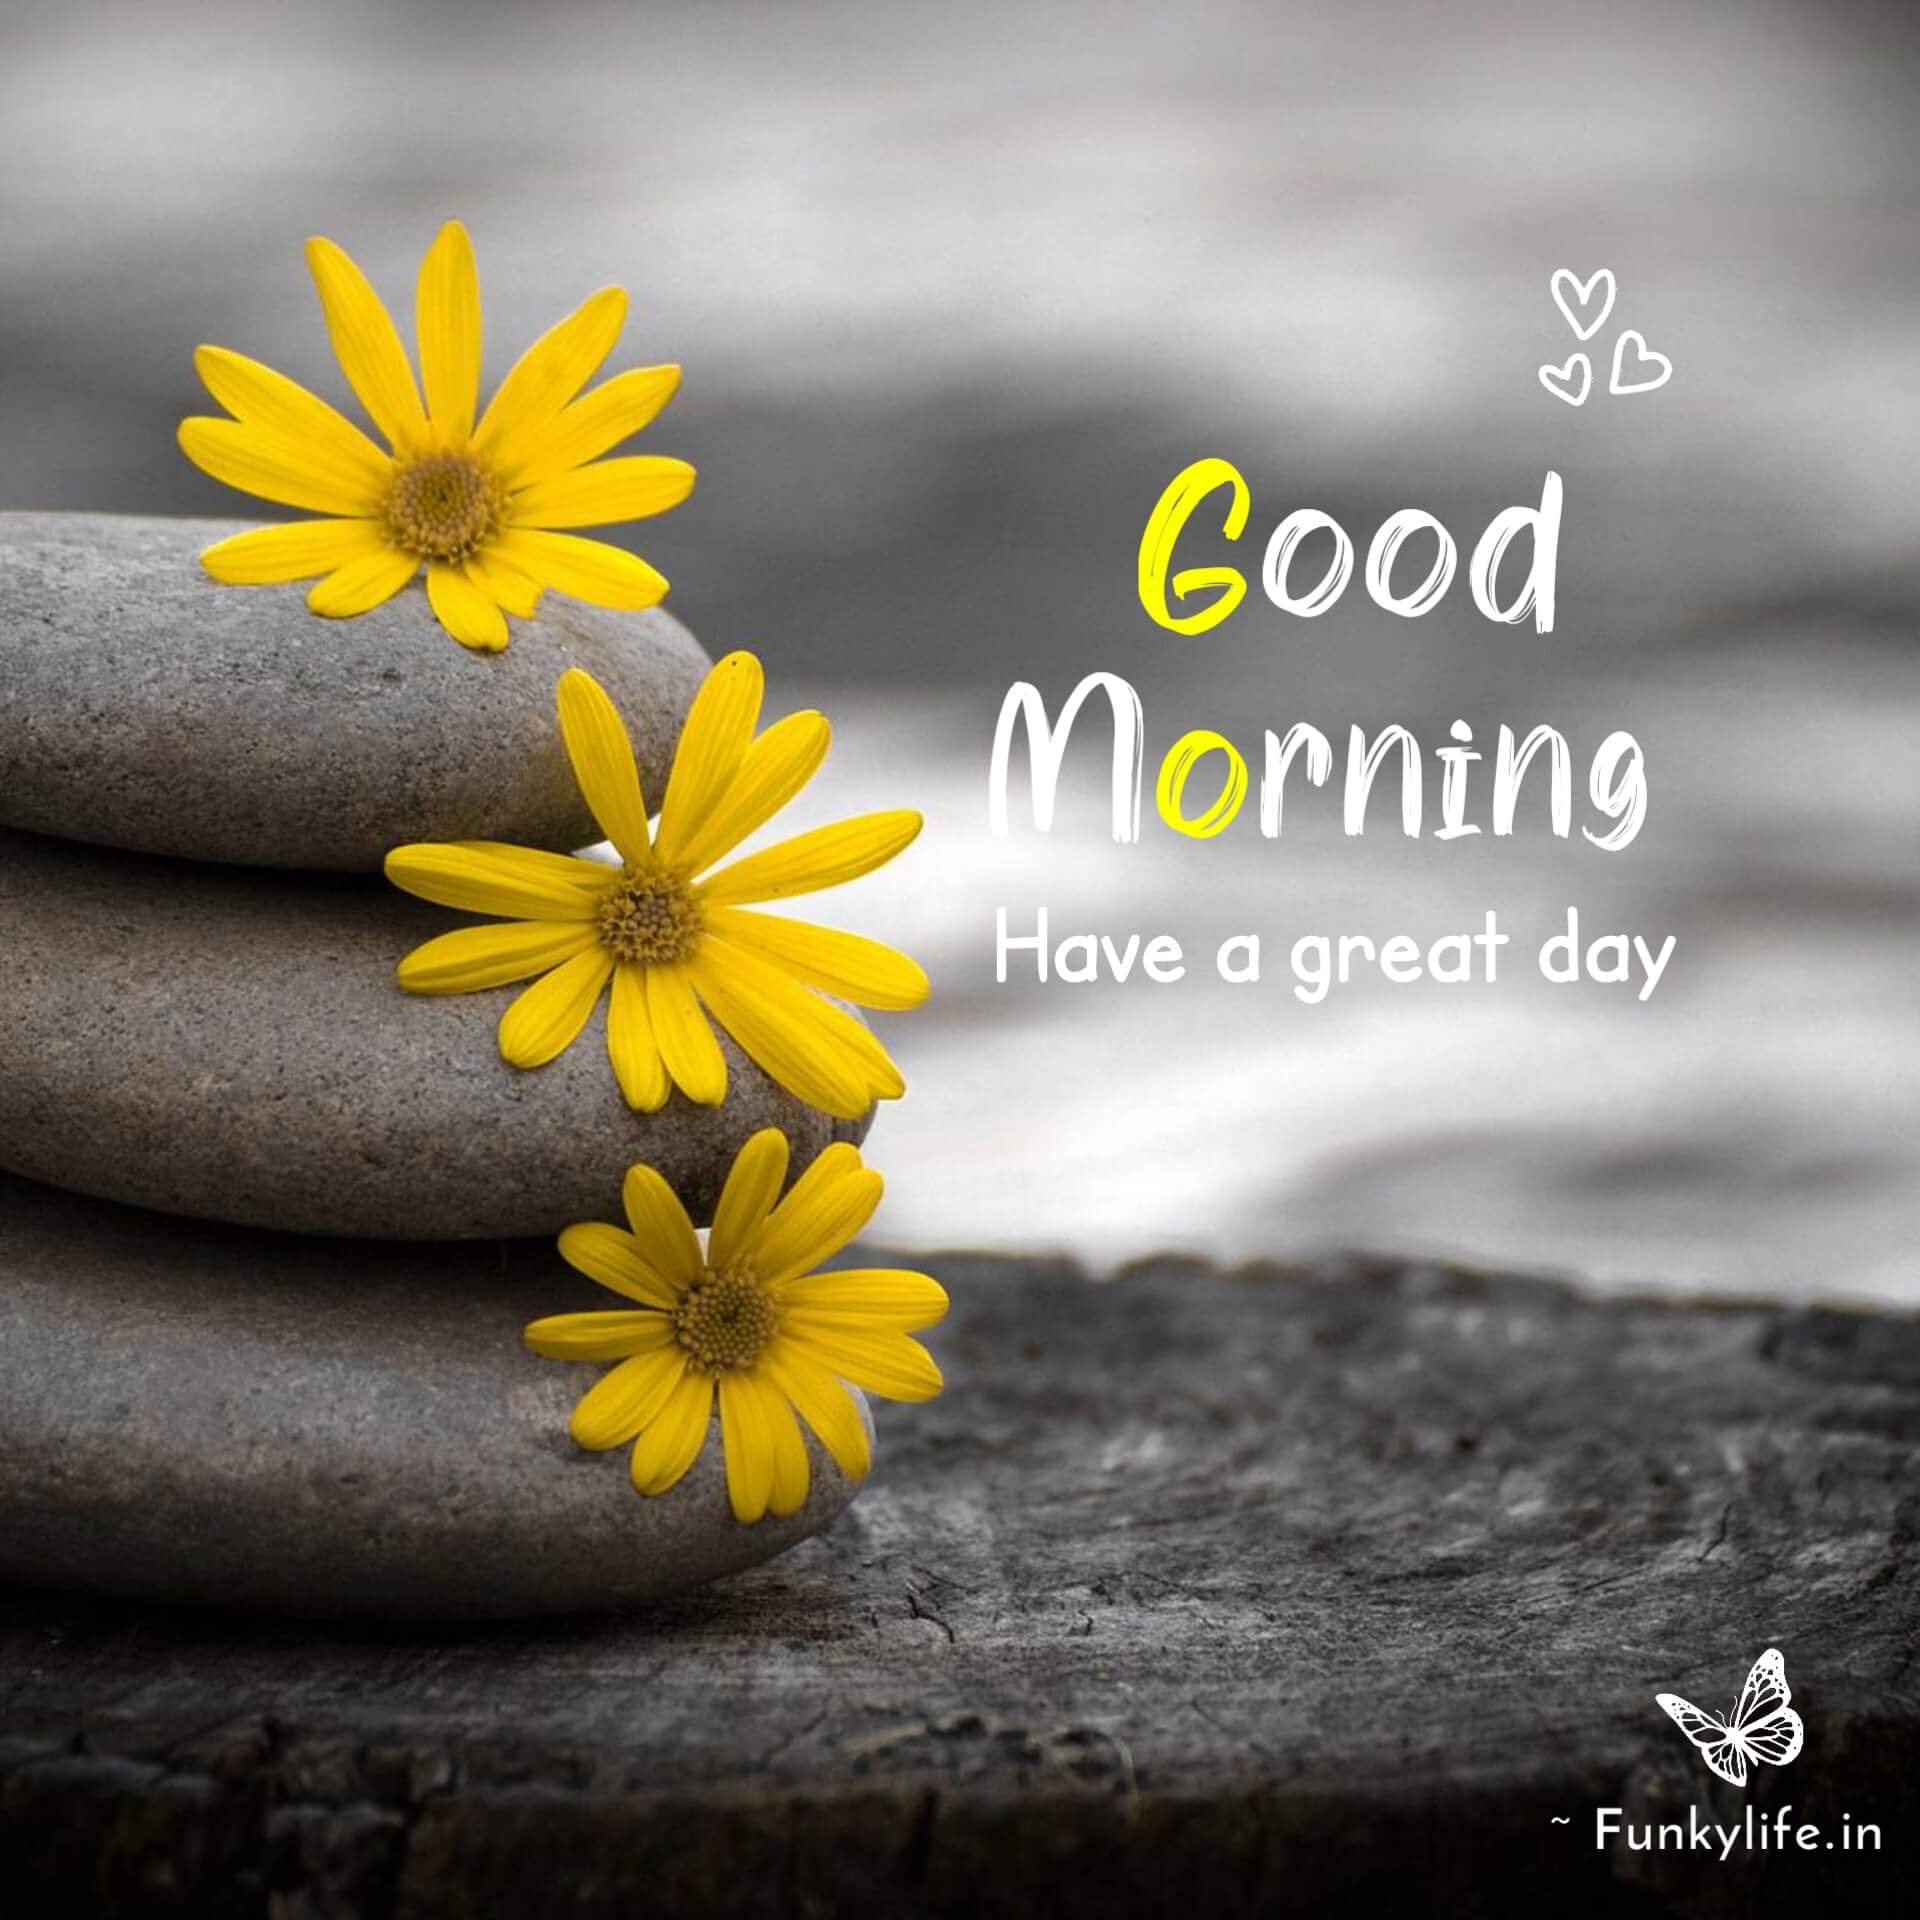 Good Morning Wishes images